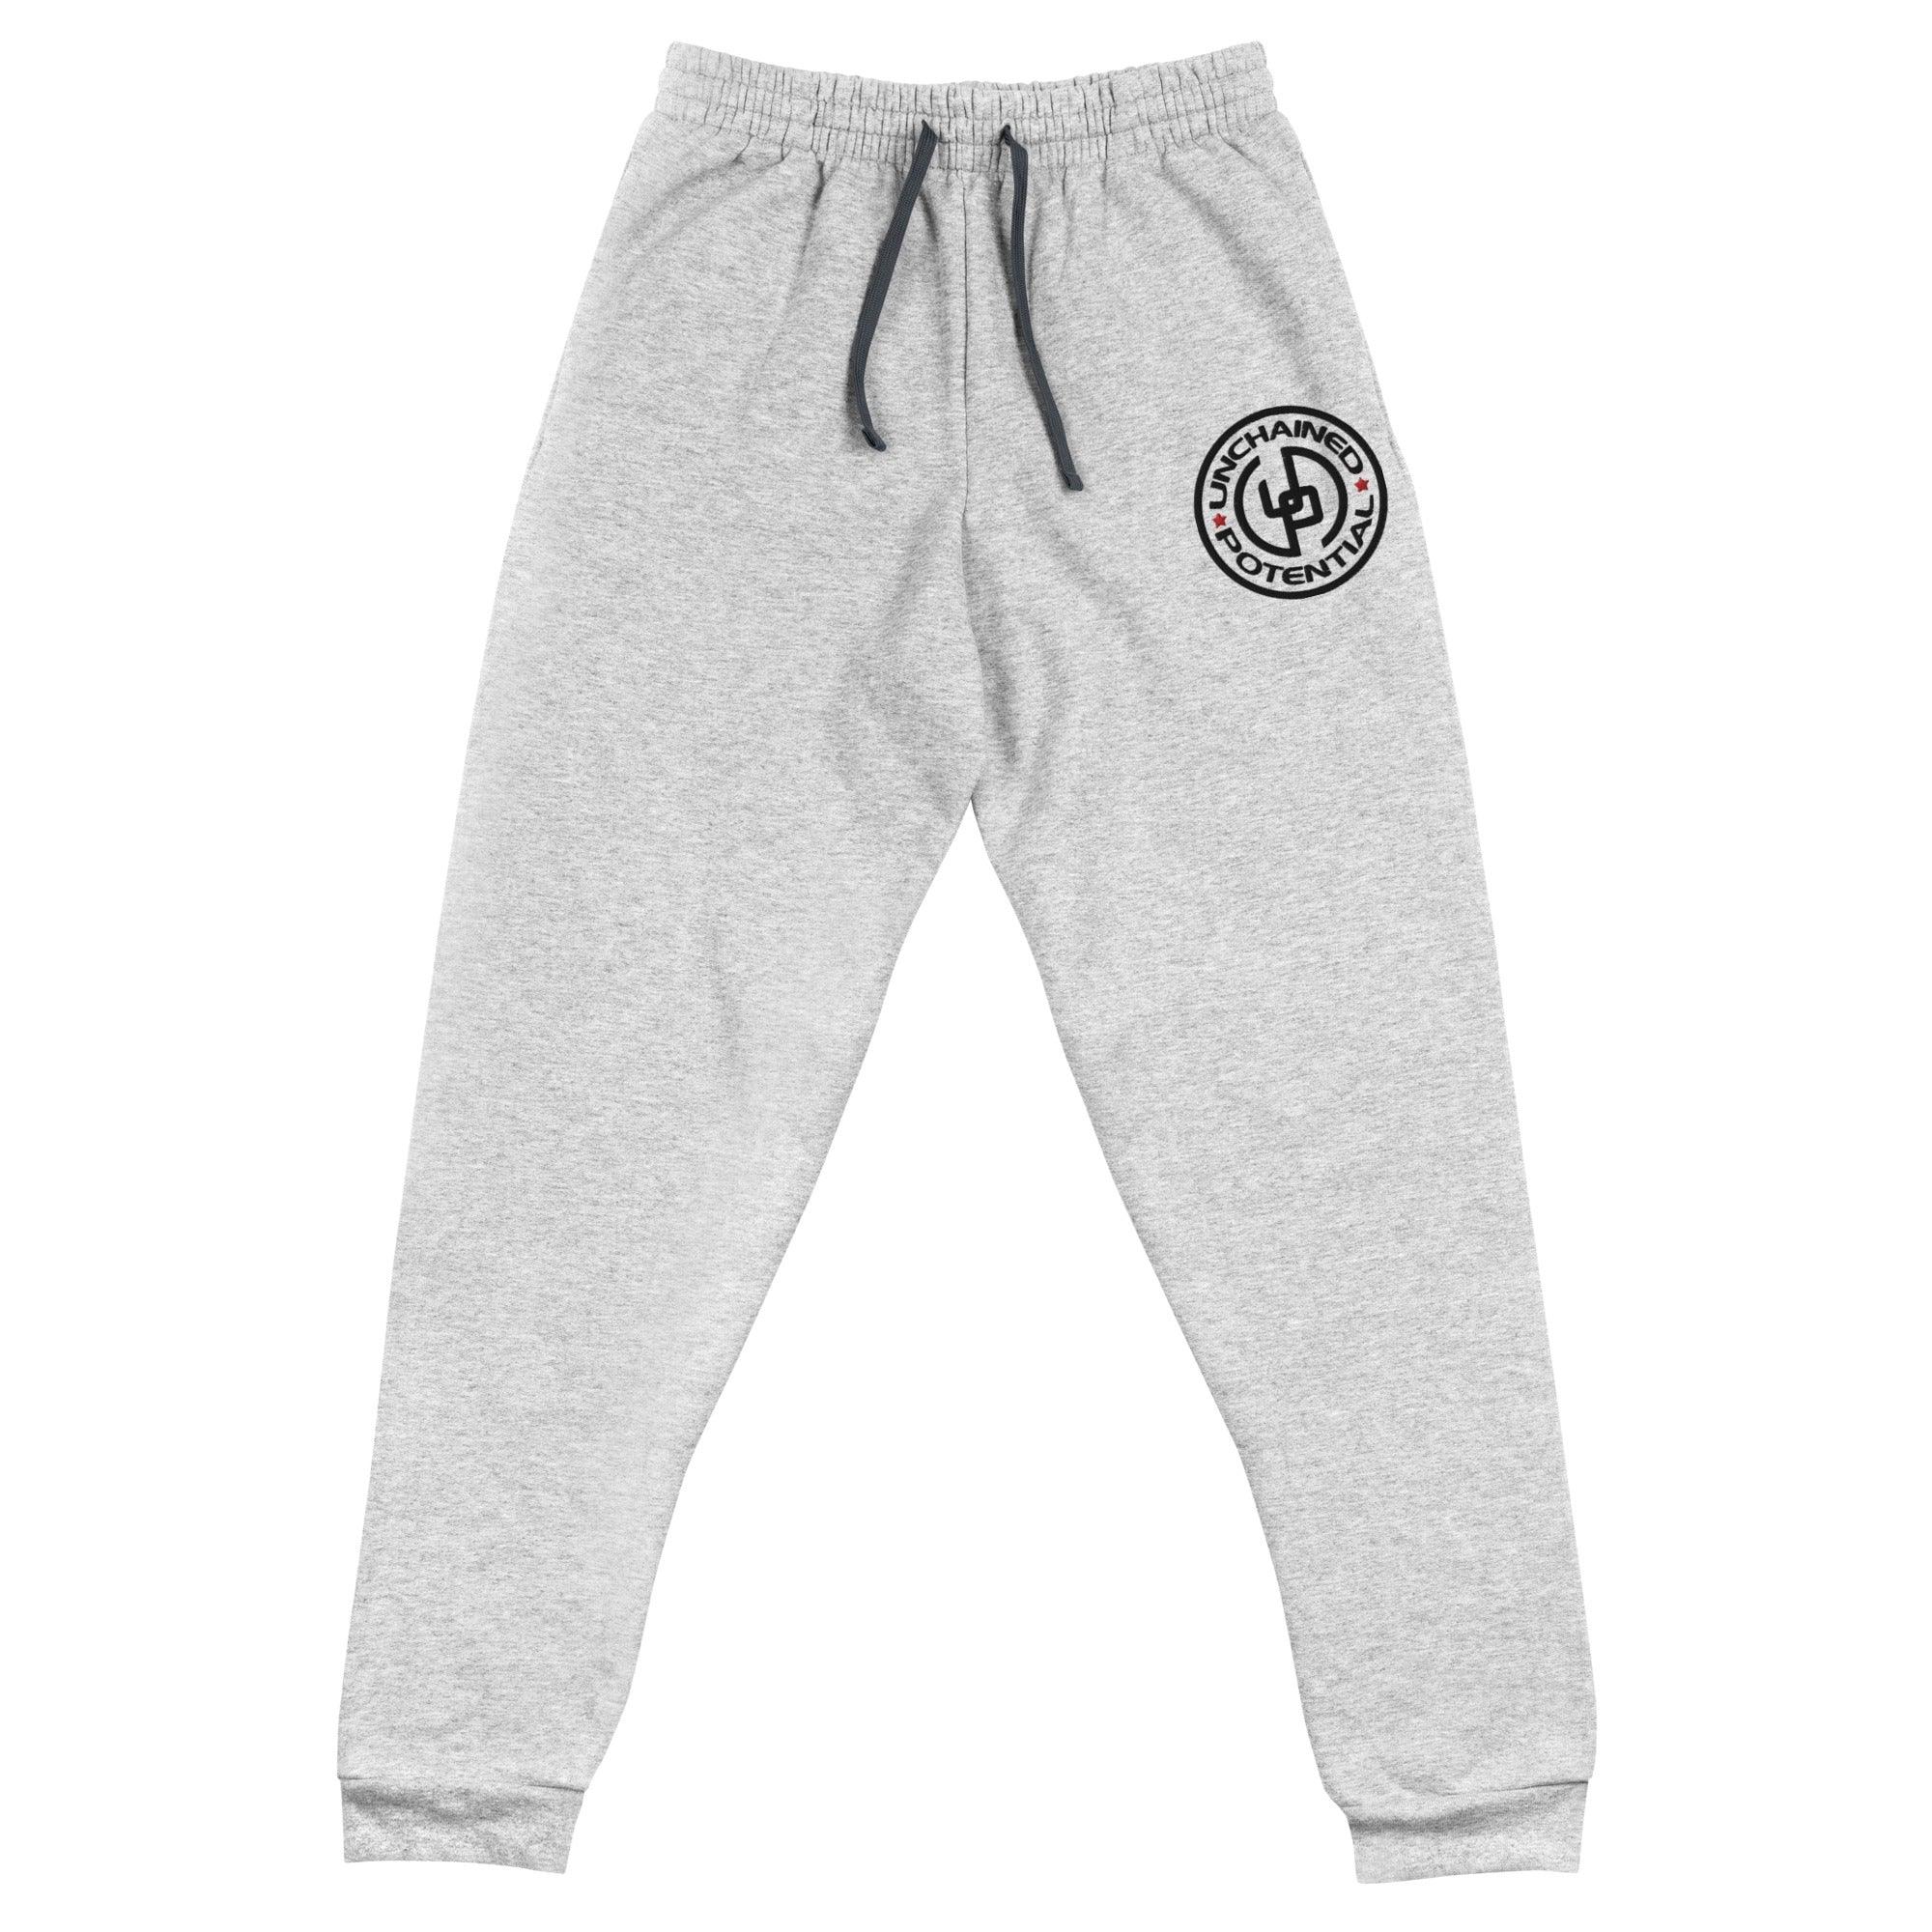 Unchained Potential Unisex Joggers